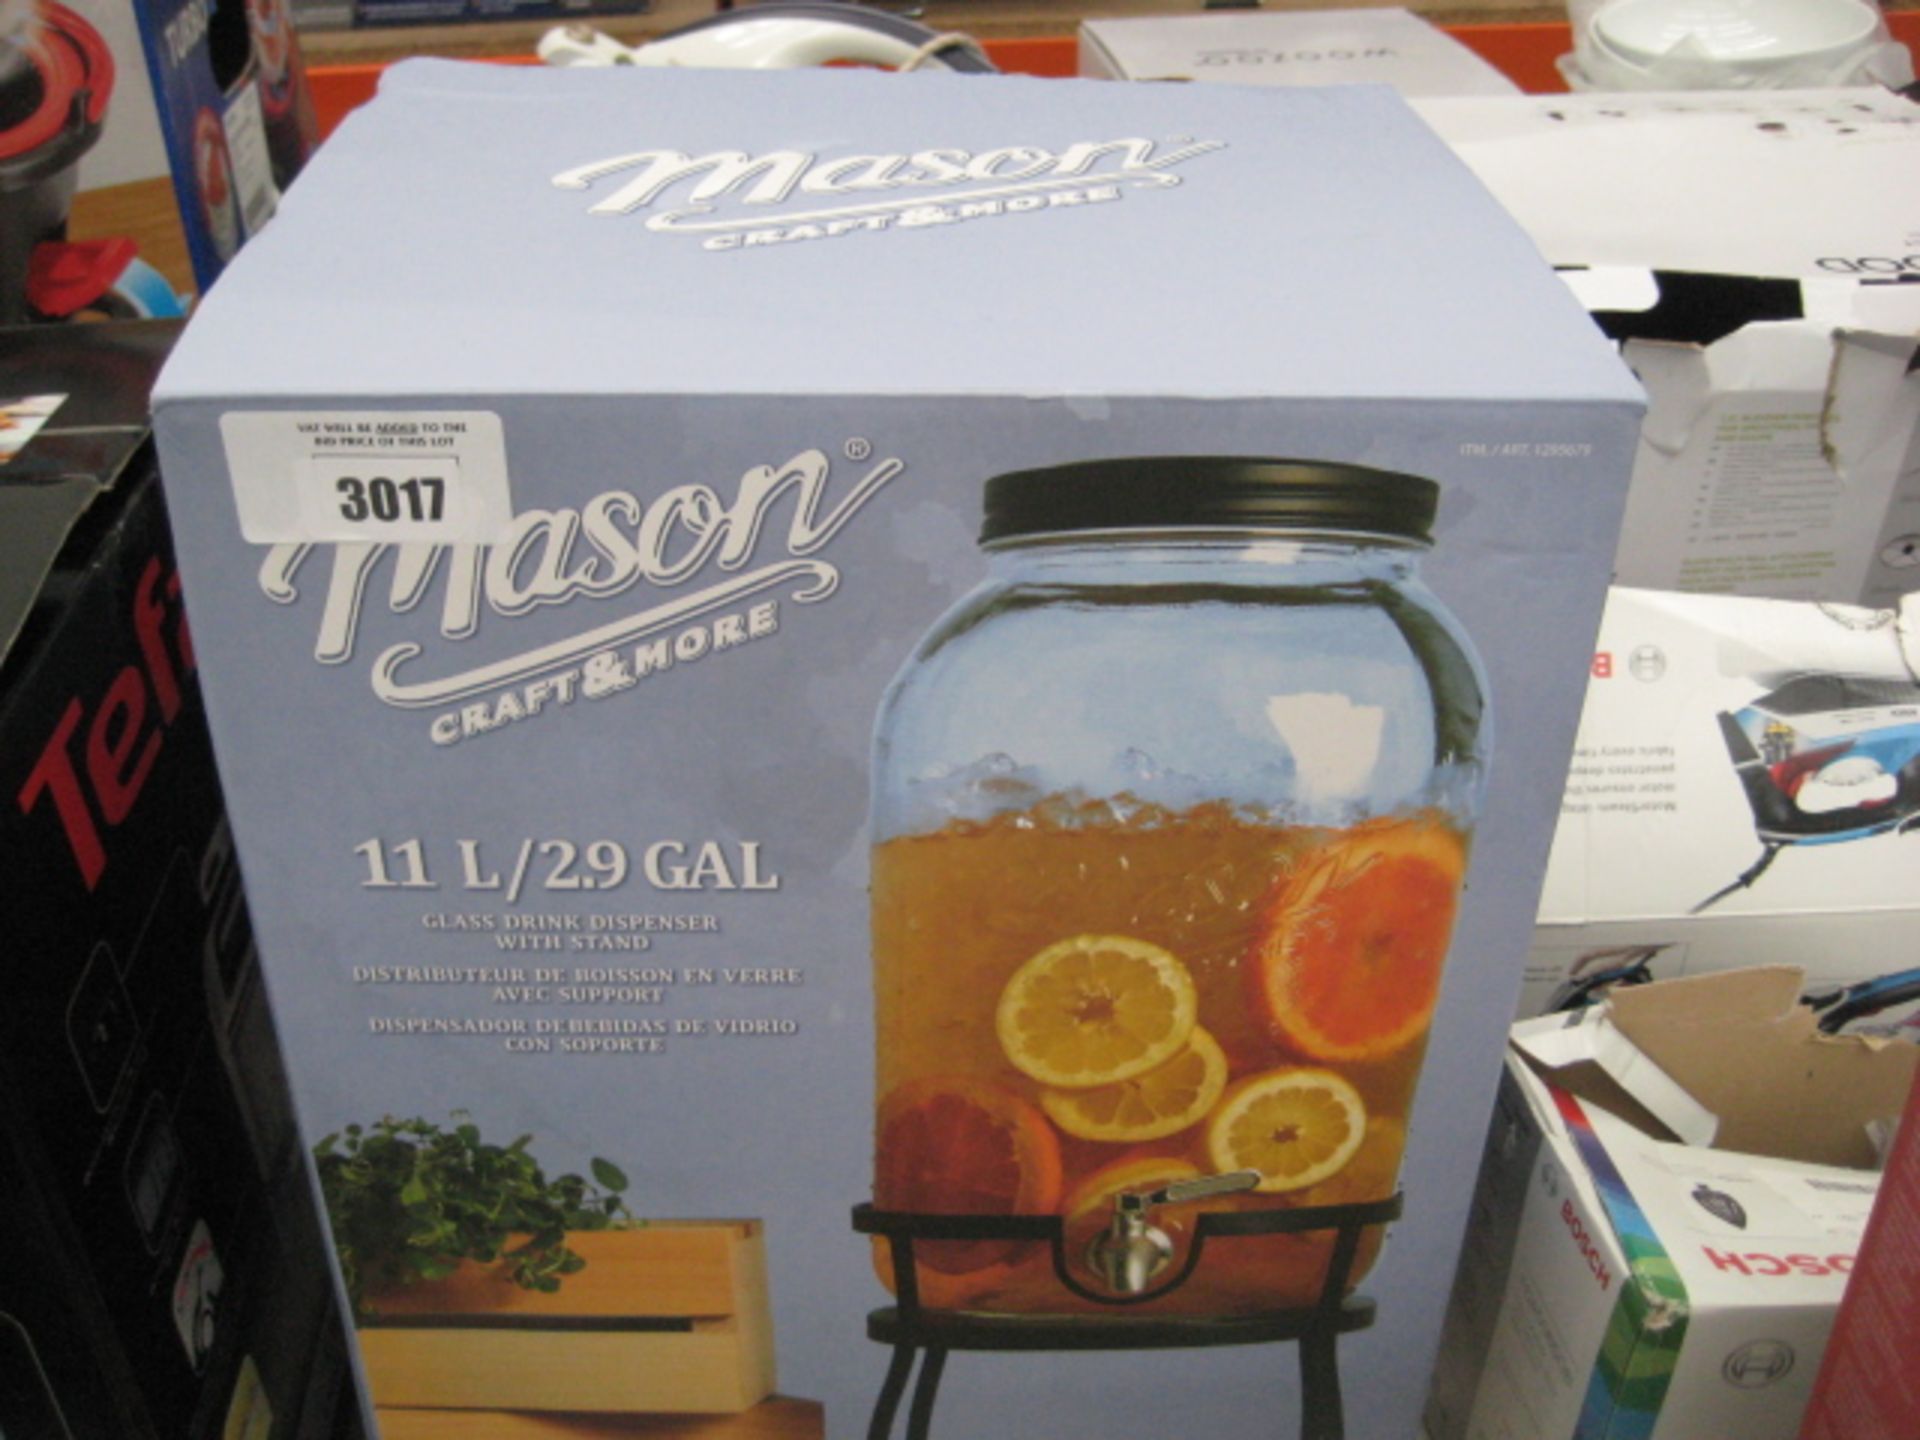 Boxed Mason Craft & More 2.9 gallon glass drinks dispenser with stand